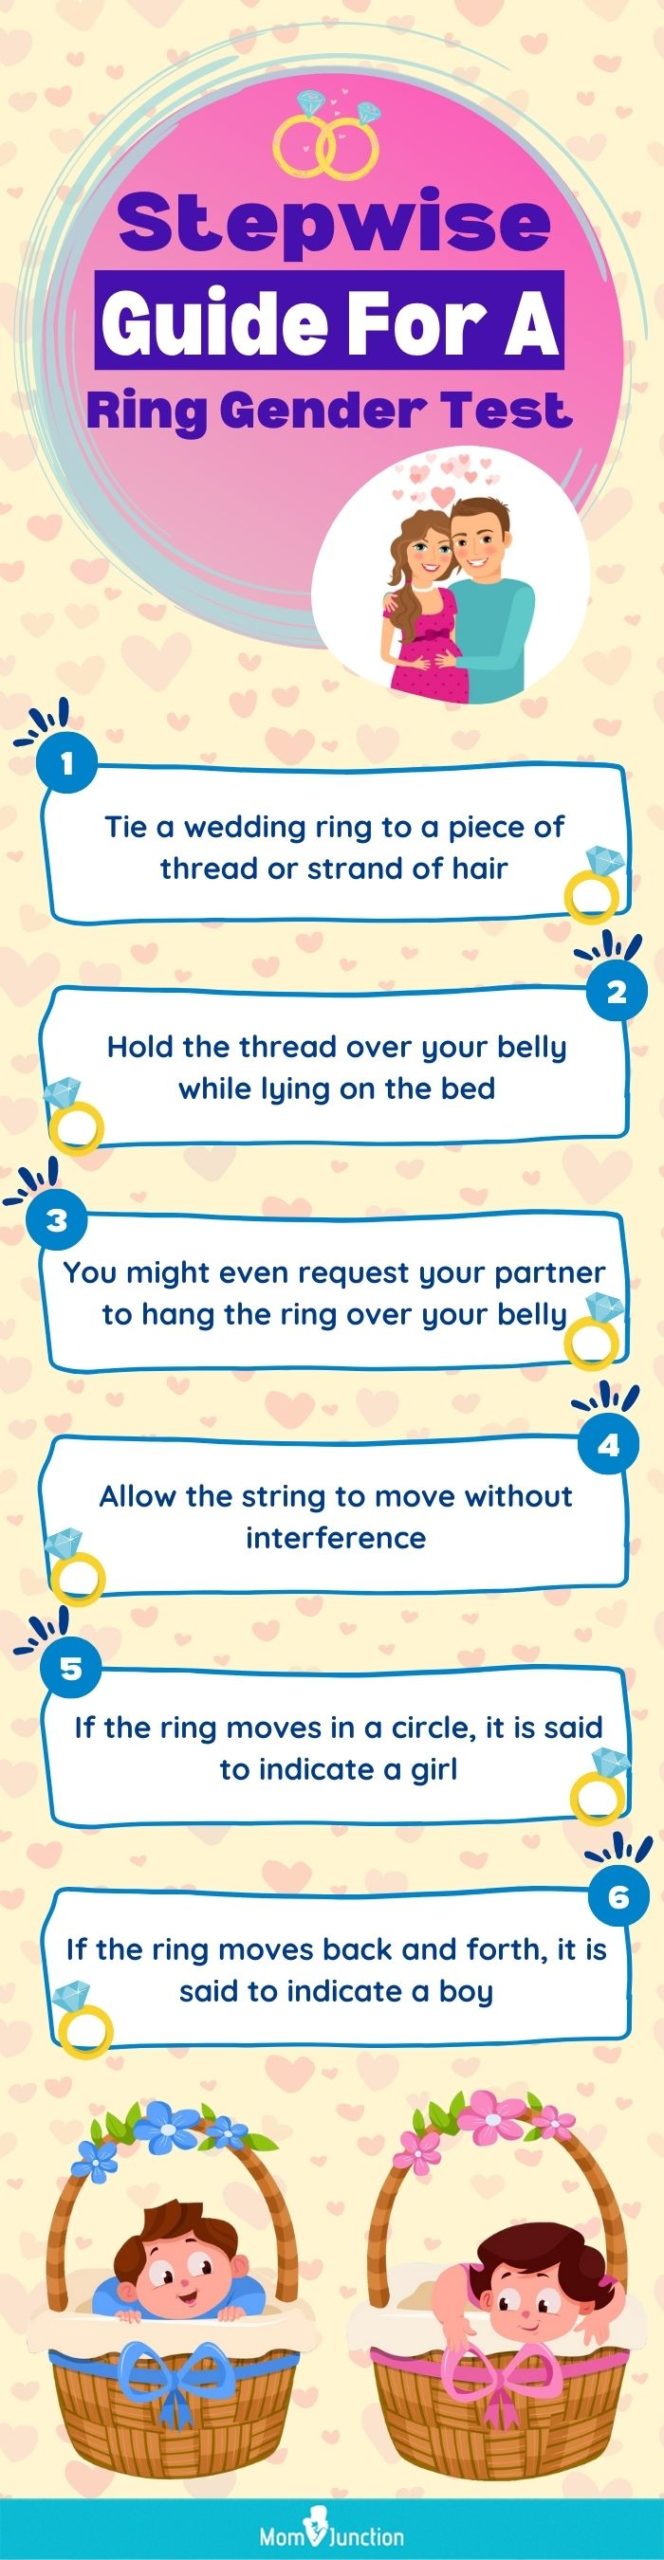 stepwise guide for a ring gender test [infographic]